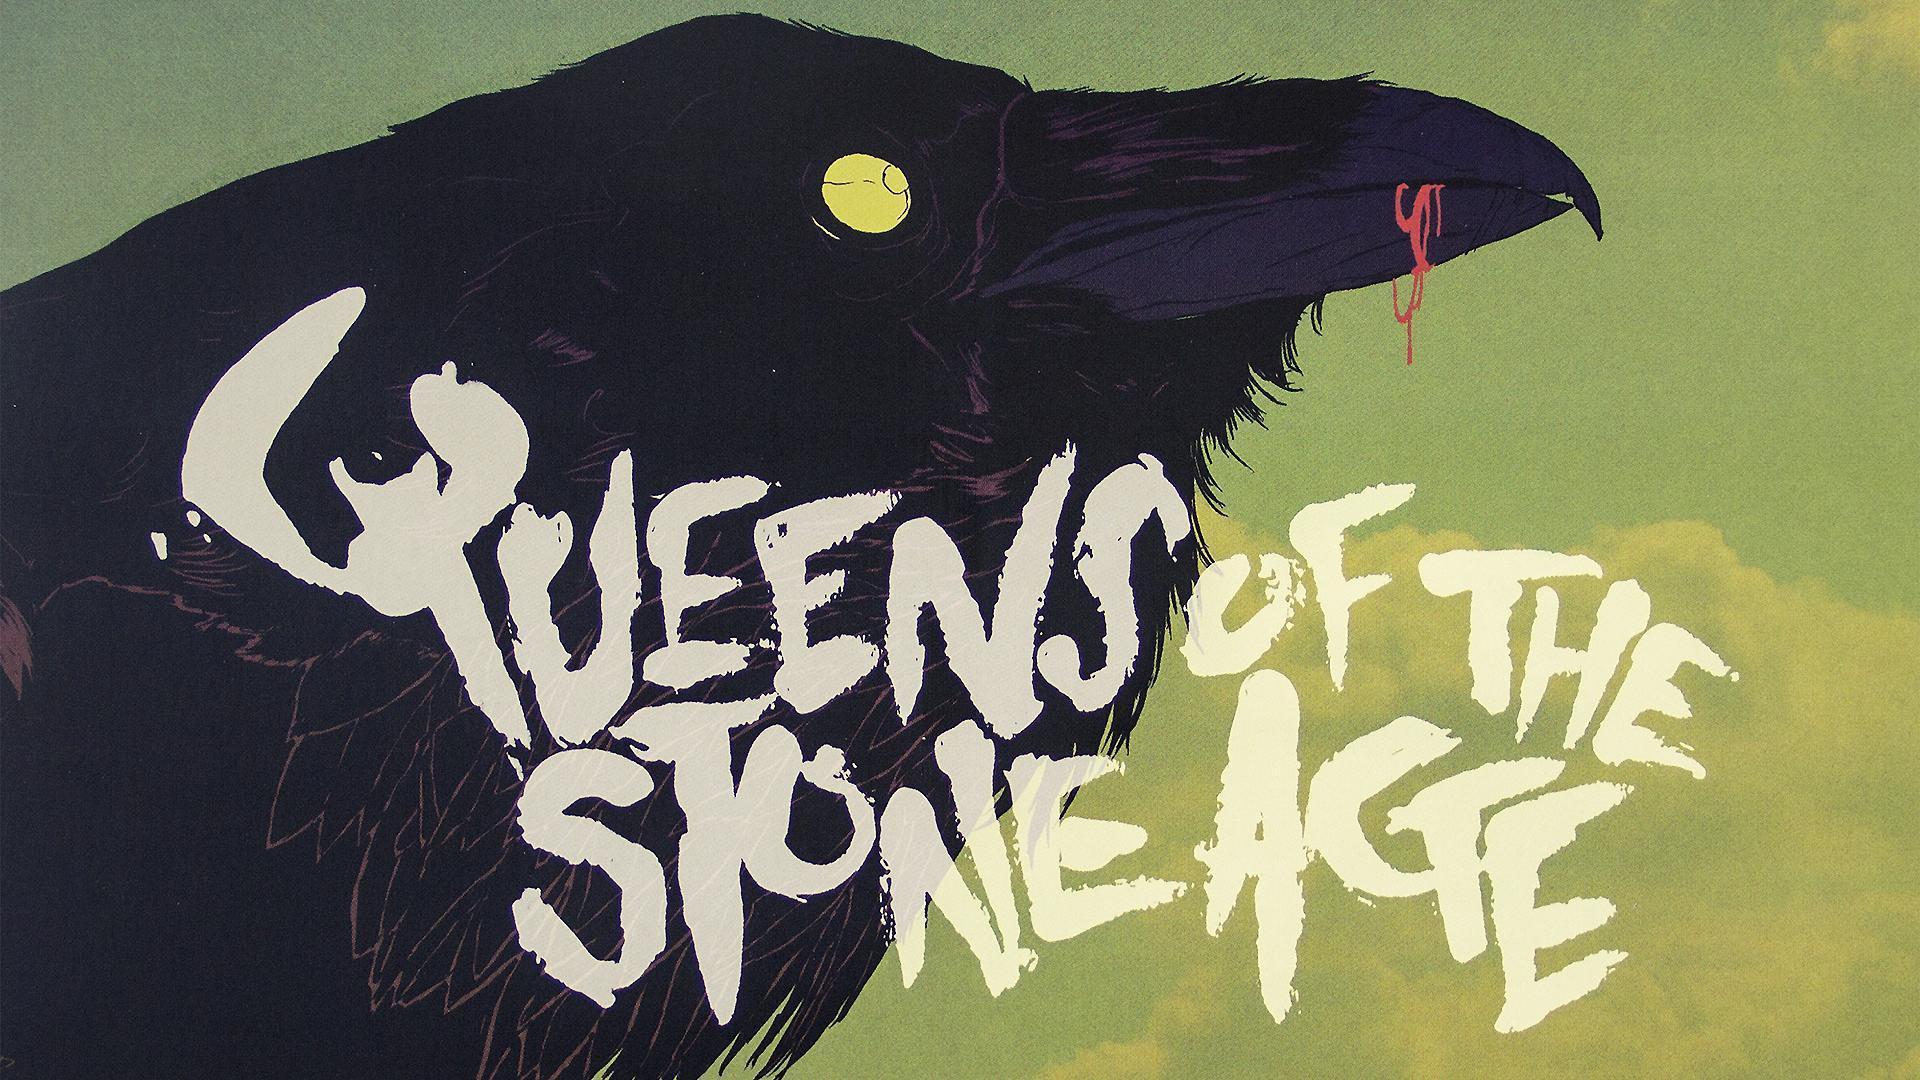 Queens Of The Stone Age Wallpapers